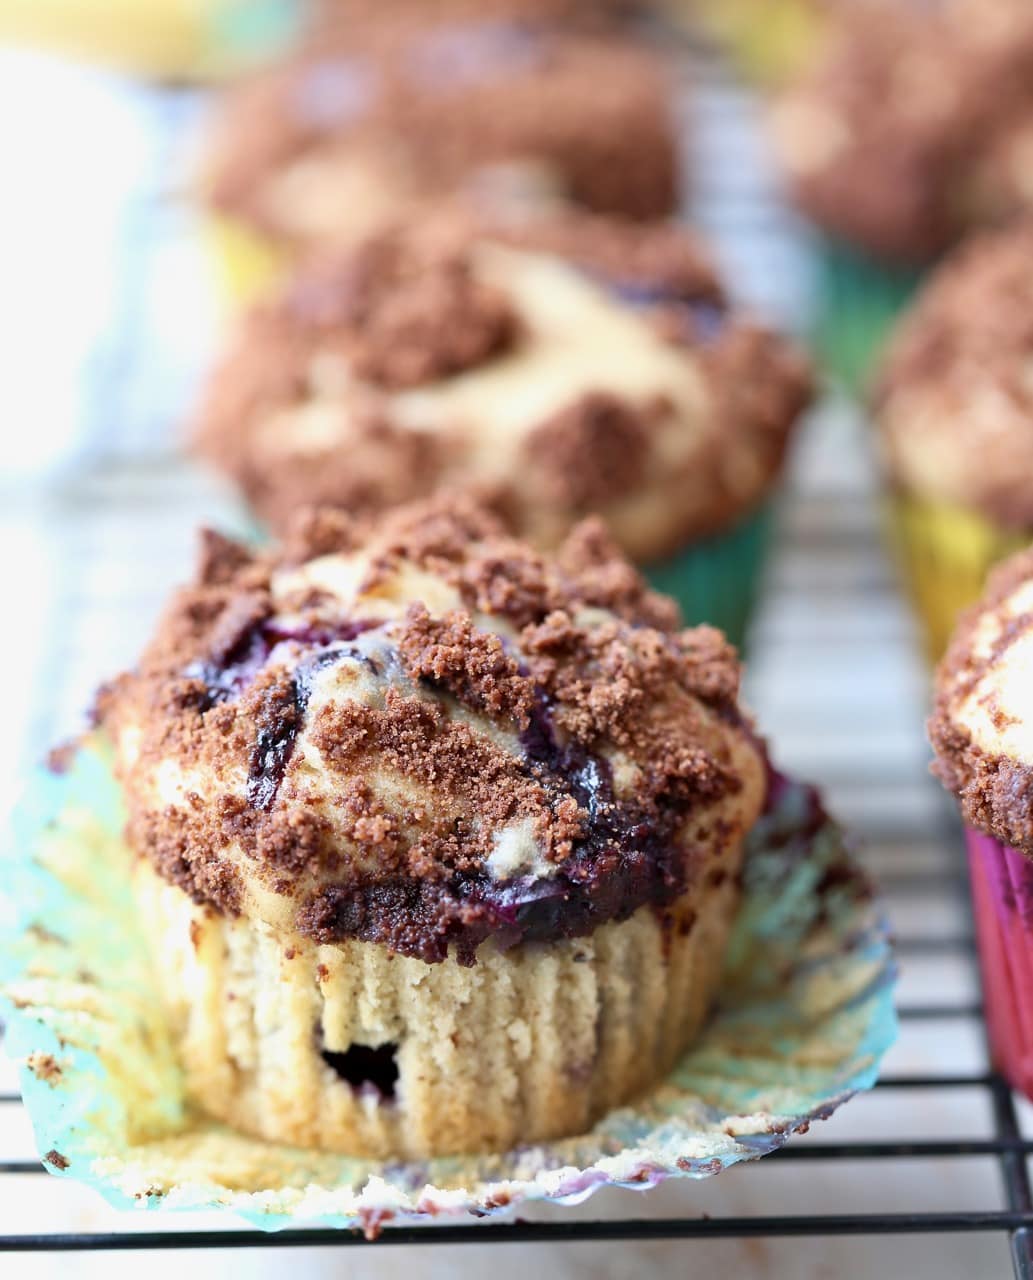 Blueberry Cream Cheese Muffins with Chocolate Crumble with Wrapper Open